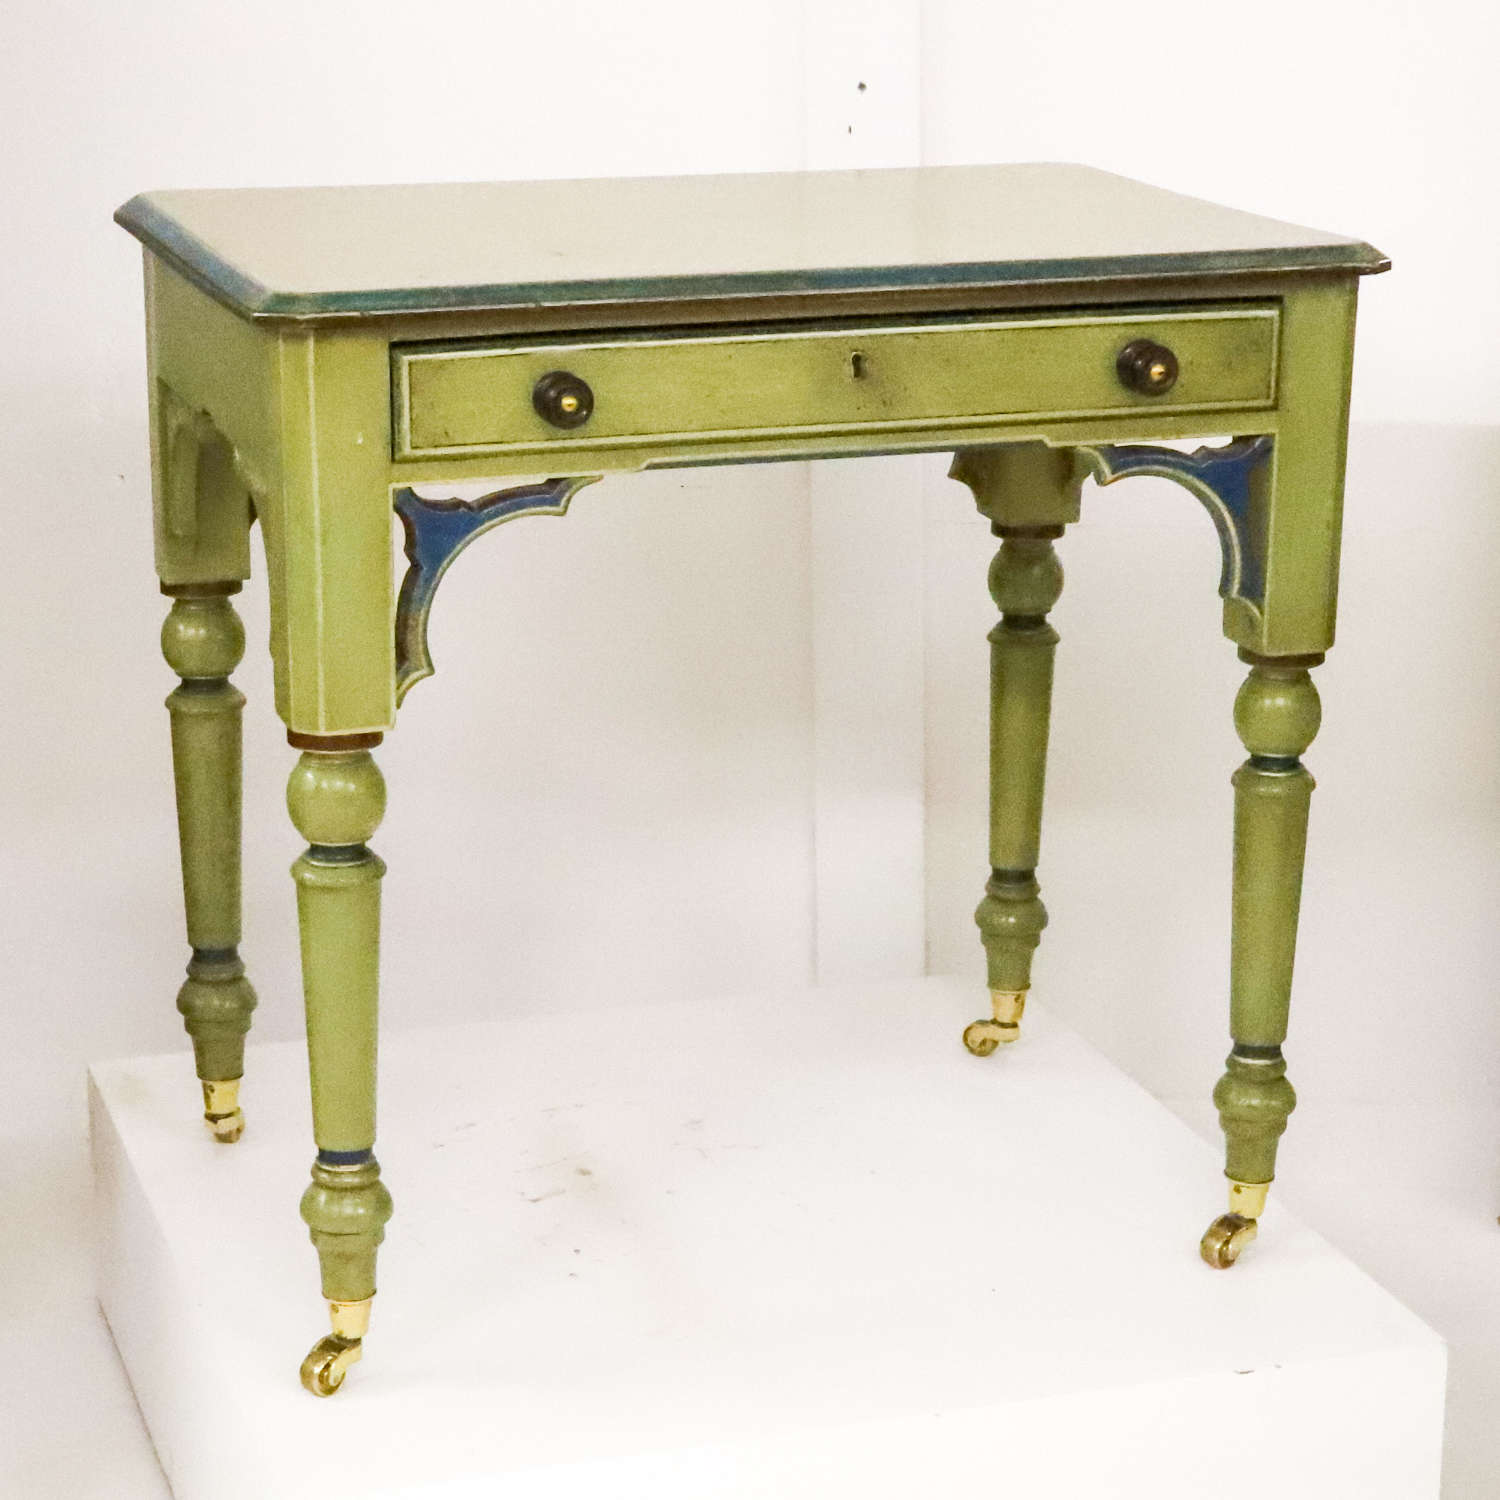 English 19th Century Painted Pine Table/Console/Desk/Sofa Table